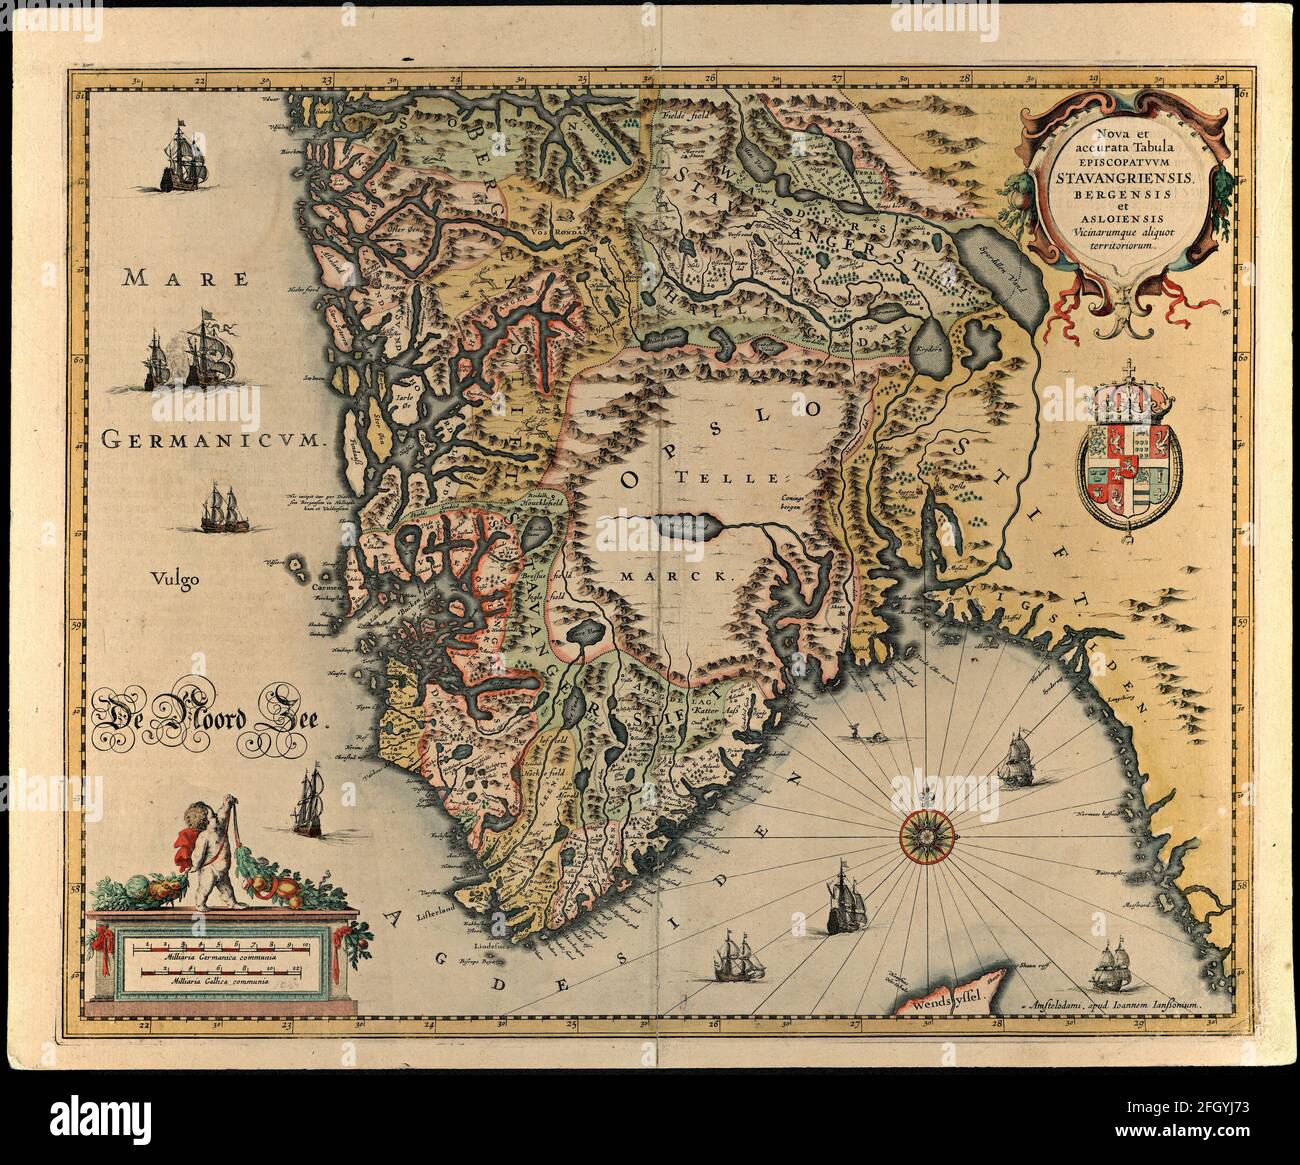 Vintage hand drawn Janssonius's map of Norge from 17th century. All maps are beautifully colored and illustrated showing known world at moment. Stock Photo